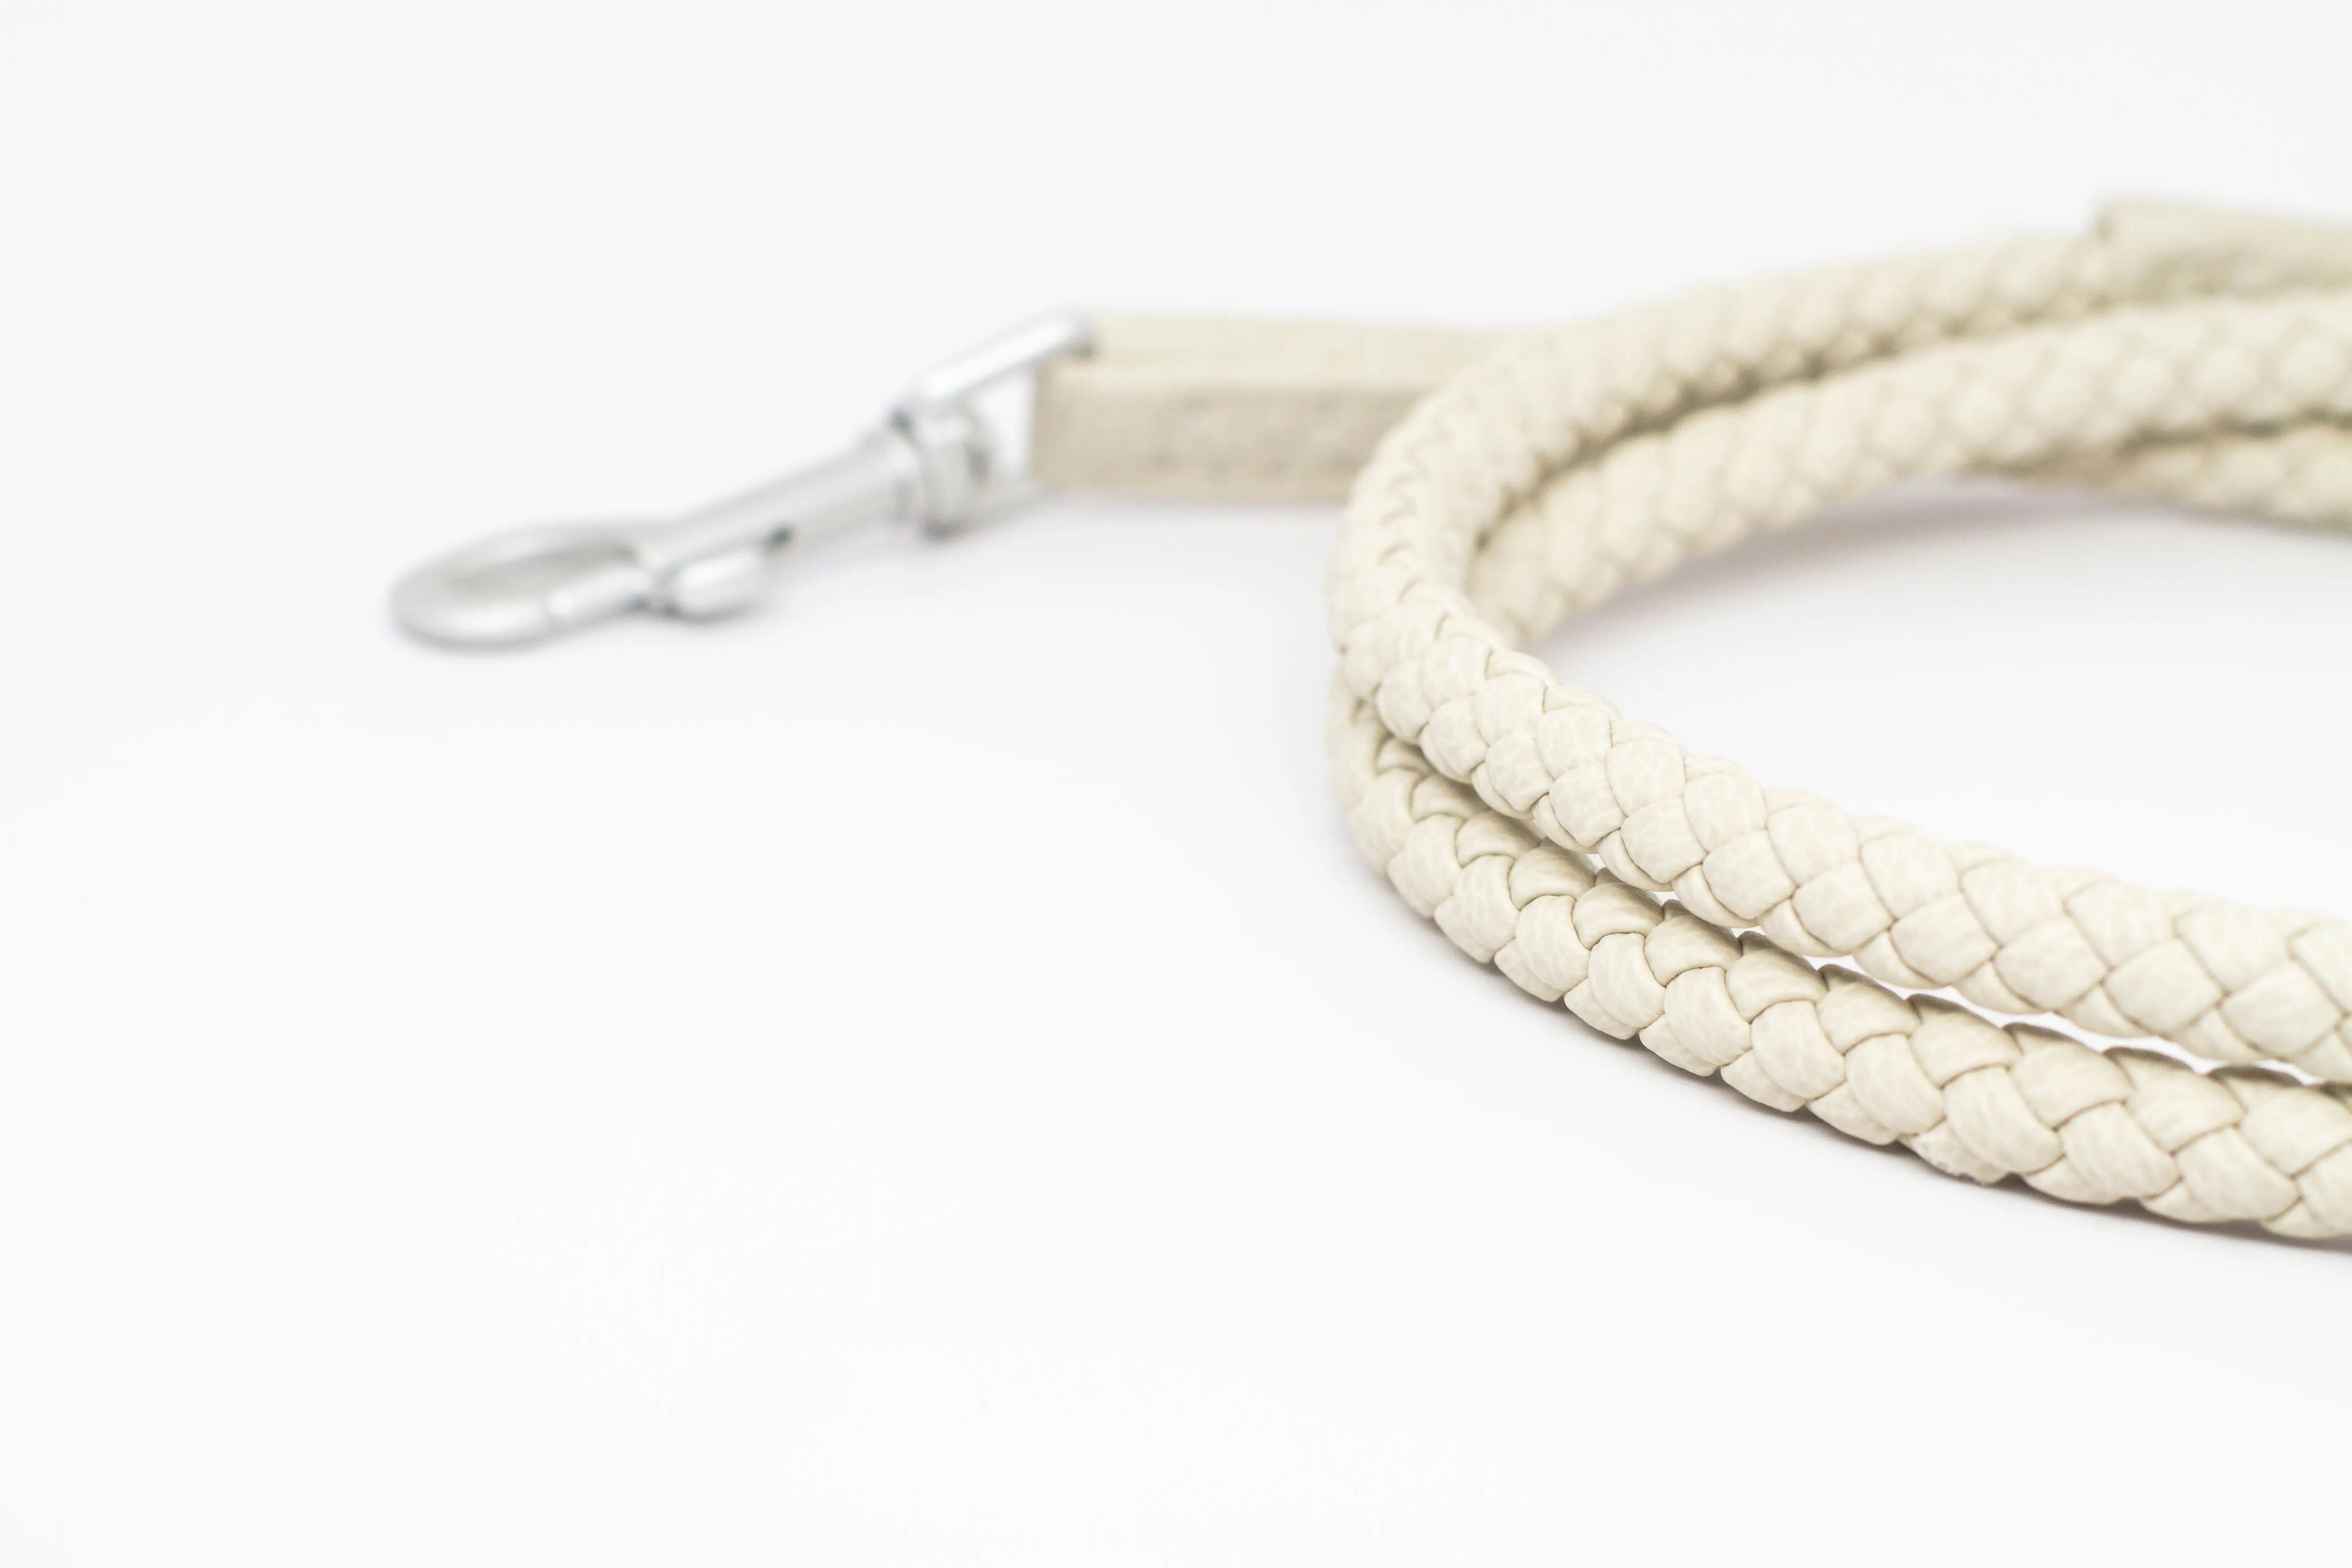 Close up of a waterproof and durable dog leash with marine grade anodized aluminum hardware in the color oyster.